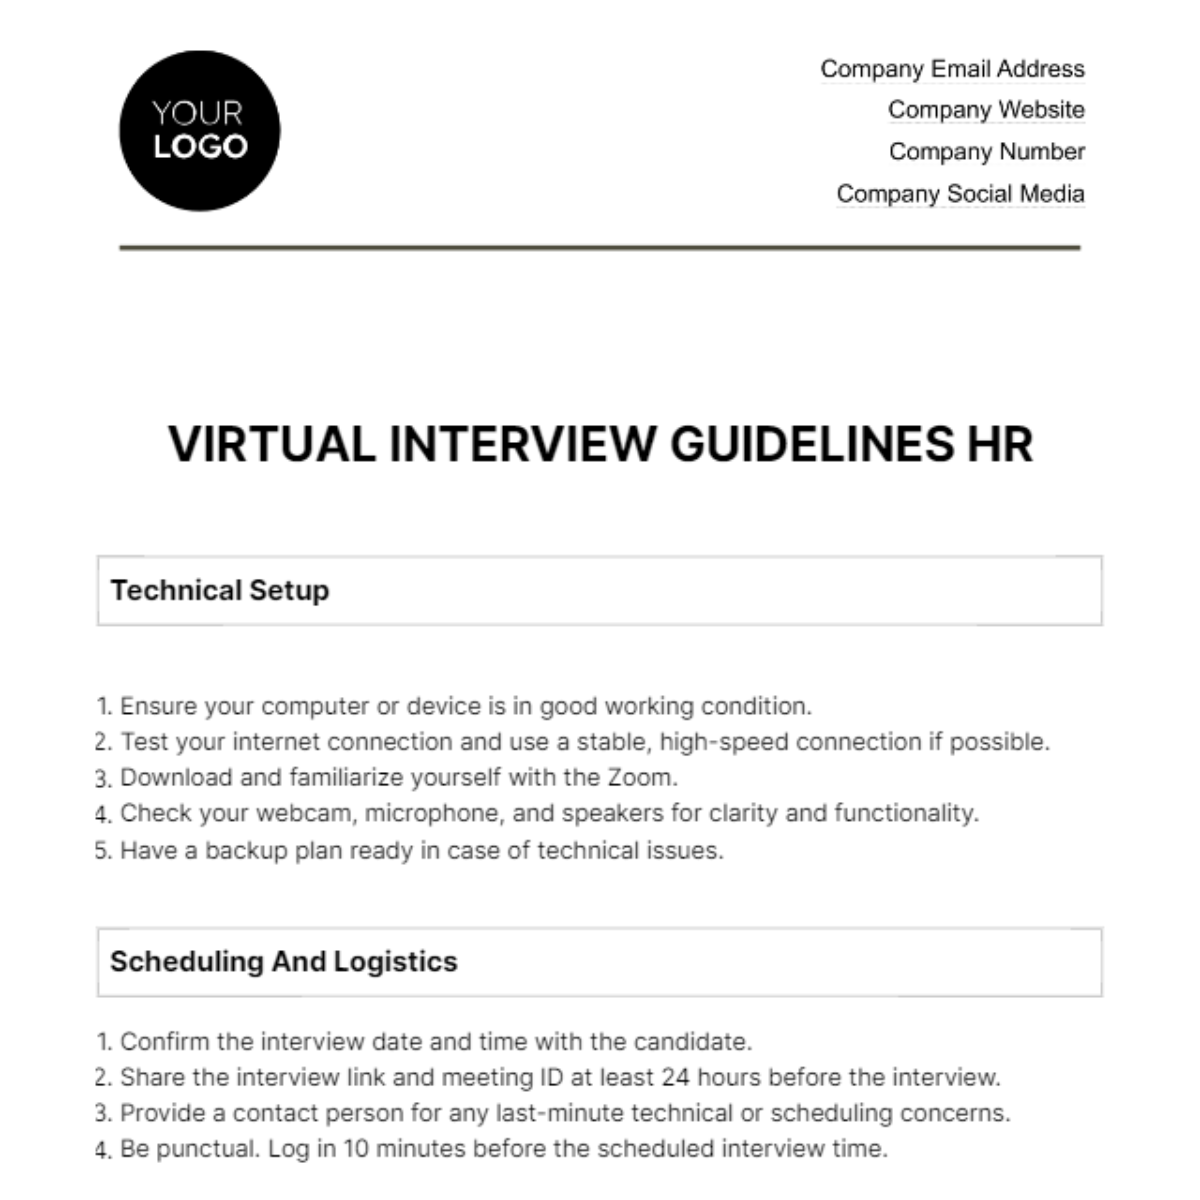 Virtual Interview Guidelines HR Template